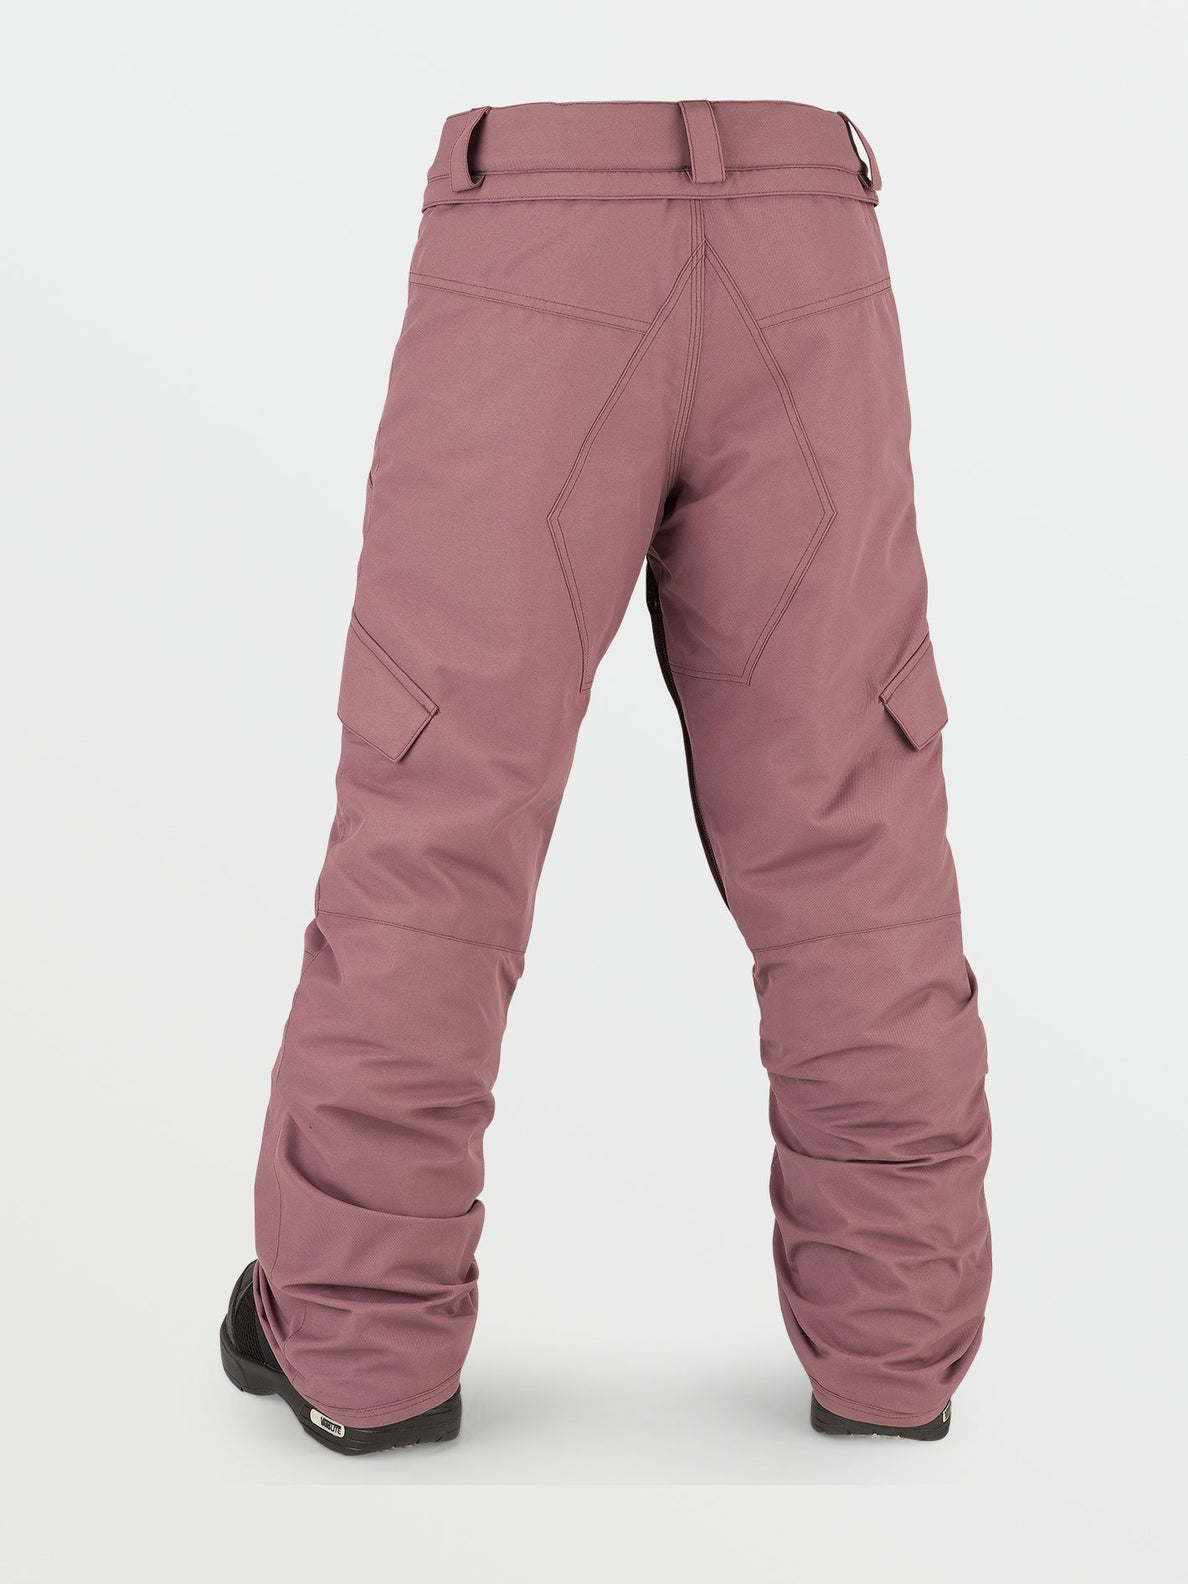 Silver Pine Insulated Trousers - ROSEWOOD - (KIDS) (N1252201_ROS) [B]